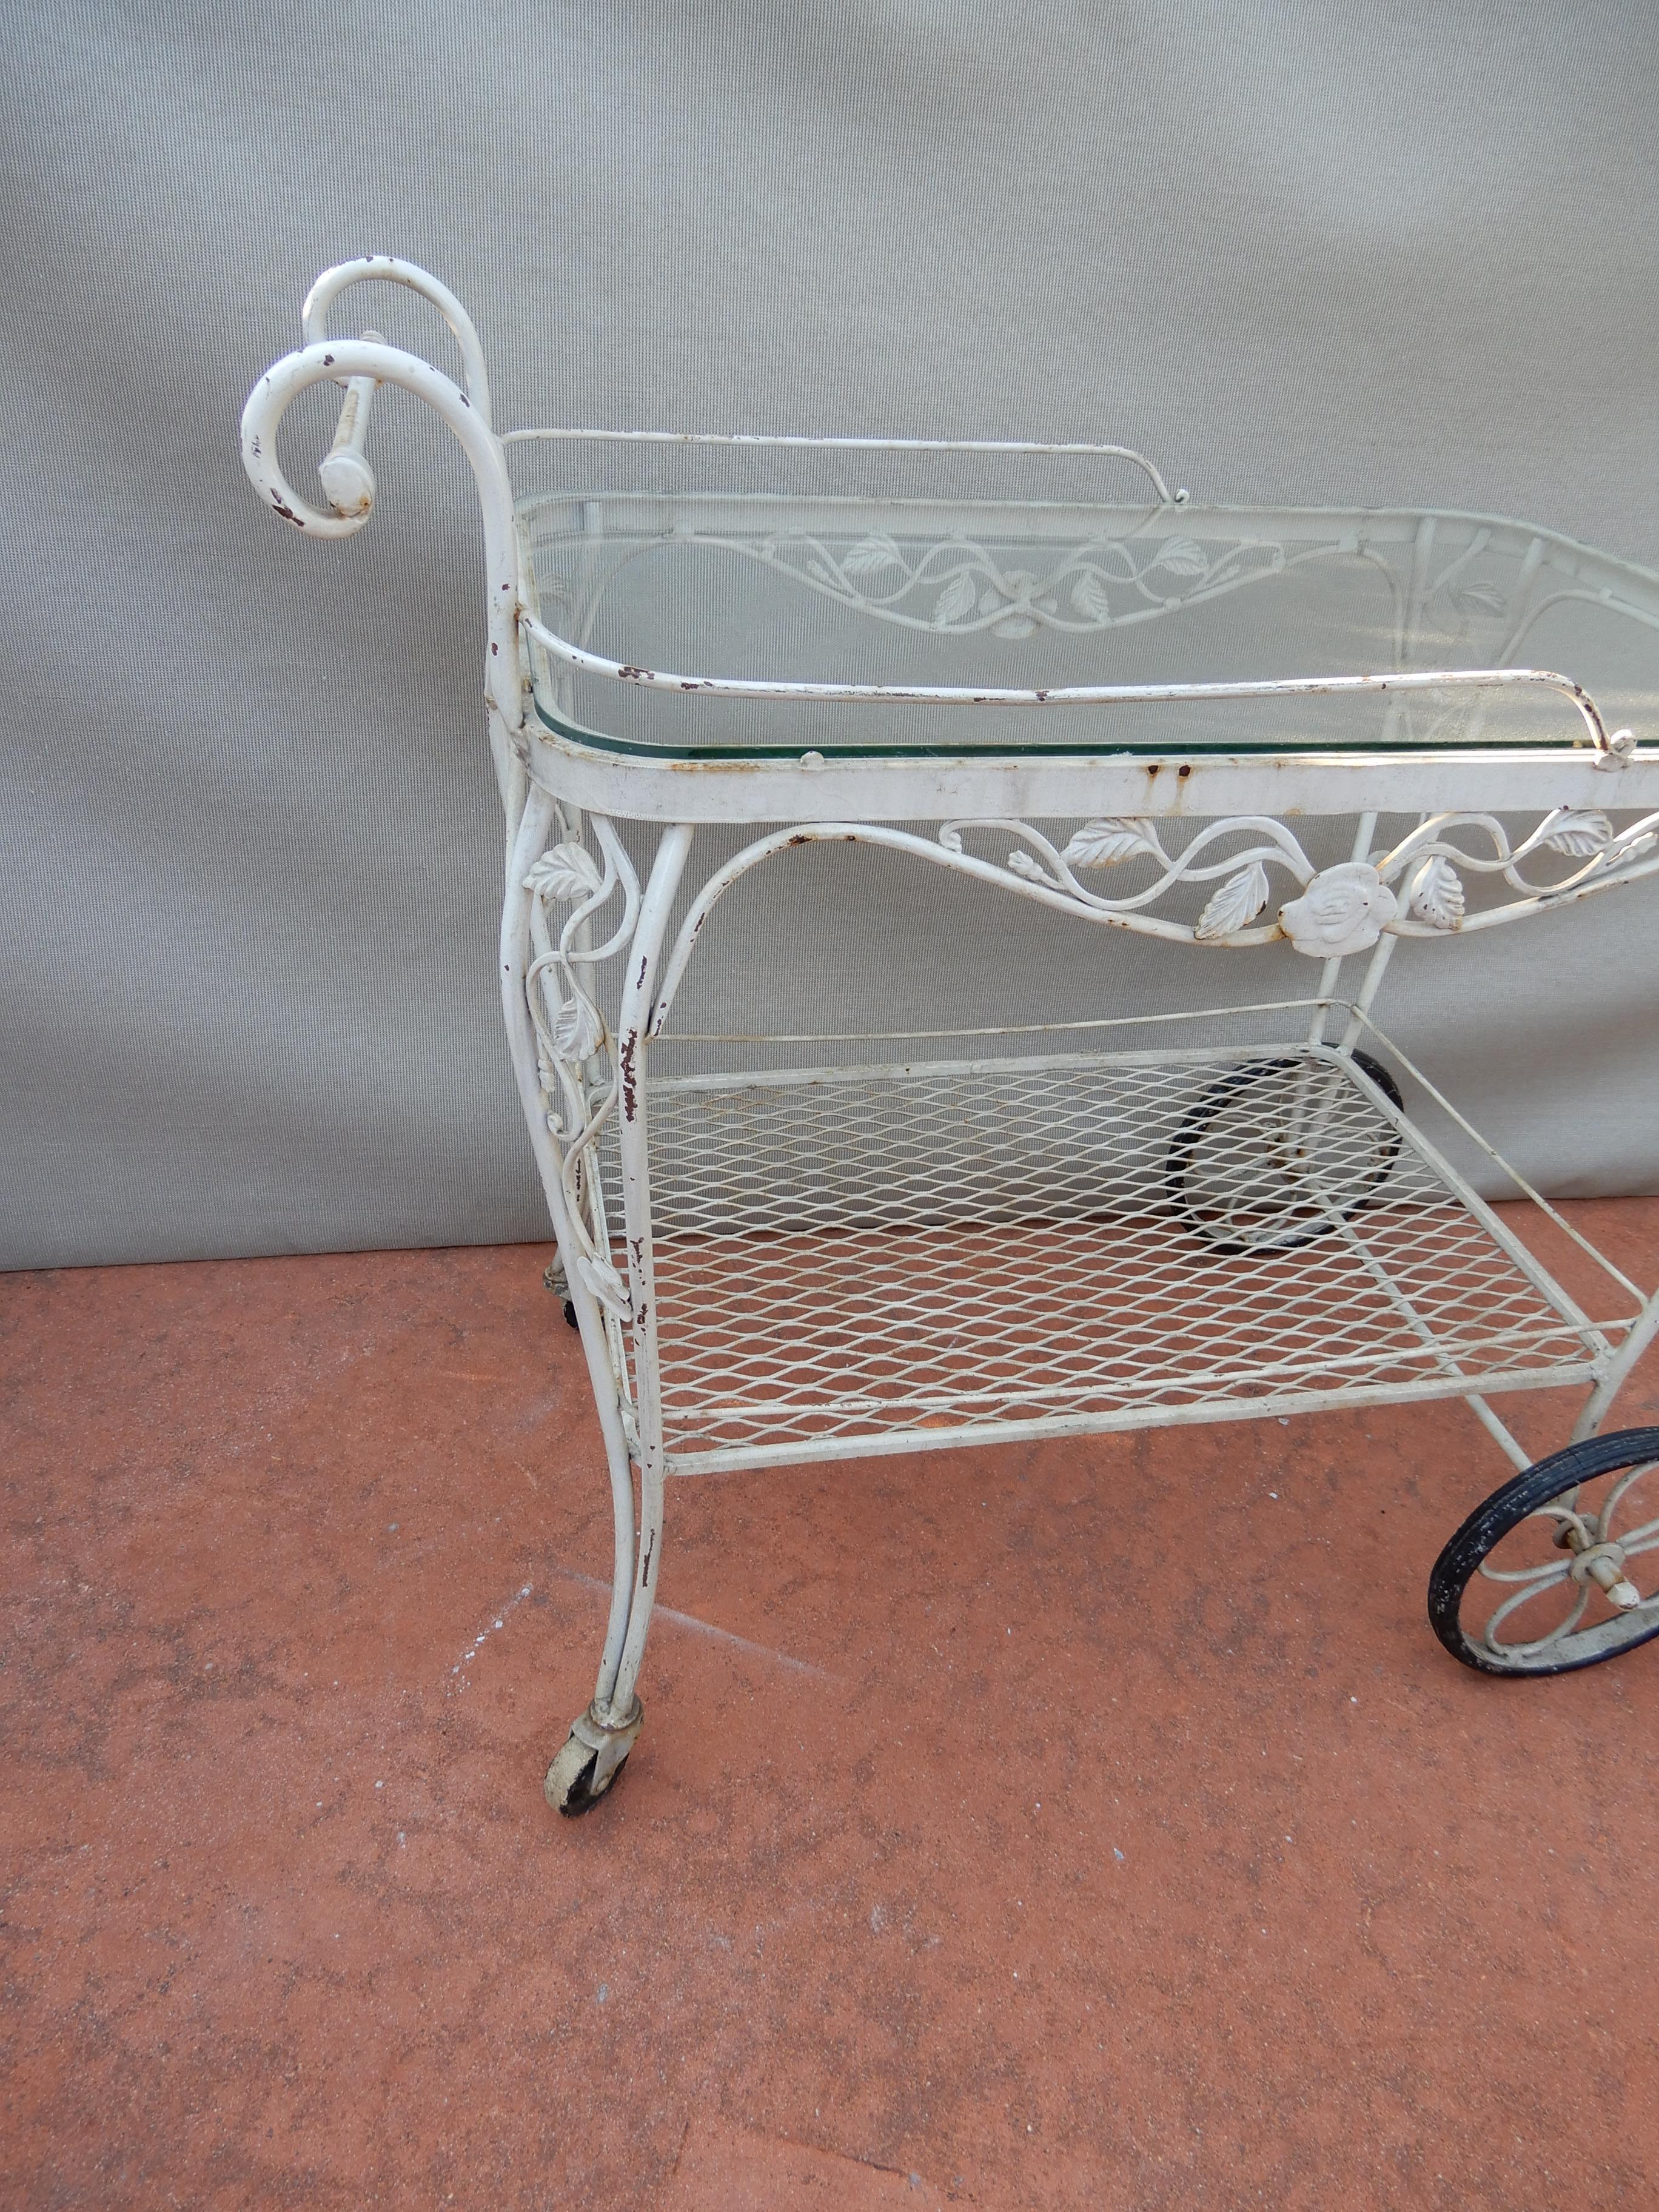 A vintage Woodard tea or bar cart. This wrought iron tea cart was manufactured by the Woodard Company in Michigan. It is in the desirable Chantilly rose pattern. The vintage tea cart maintains an old worn white finish and the original rubber tires